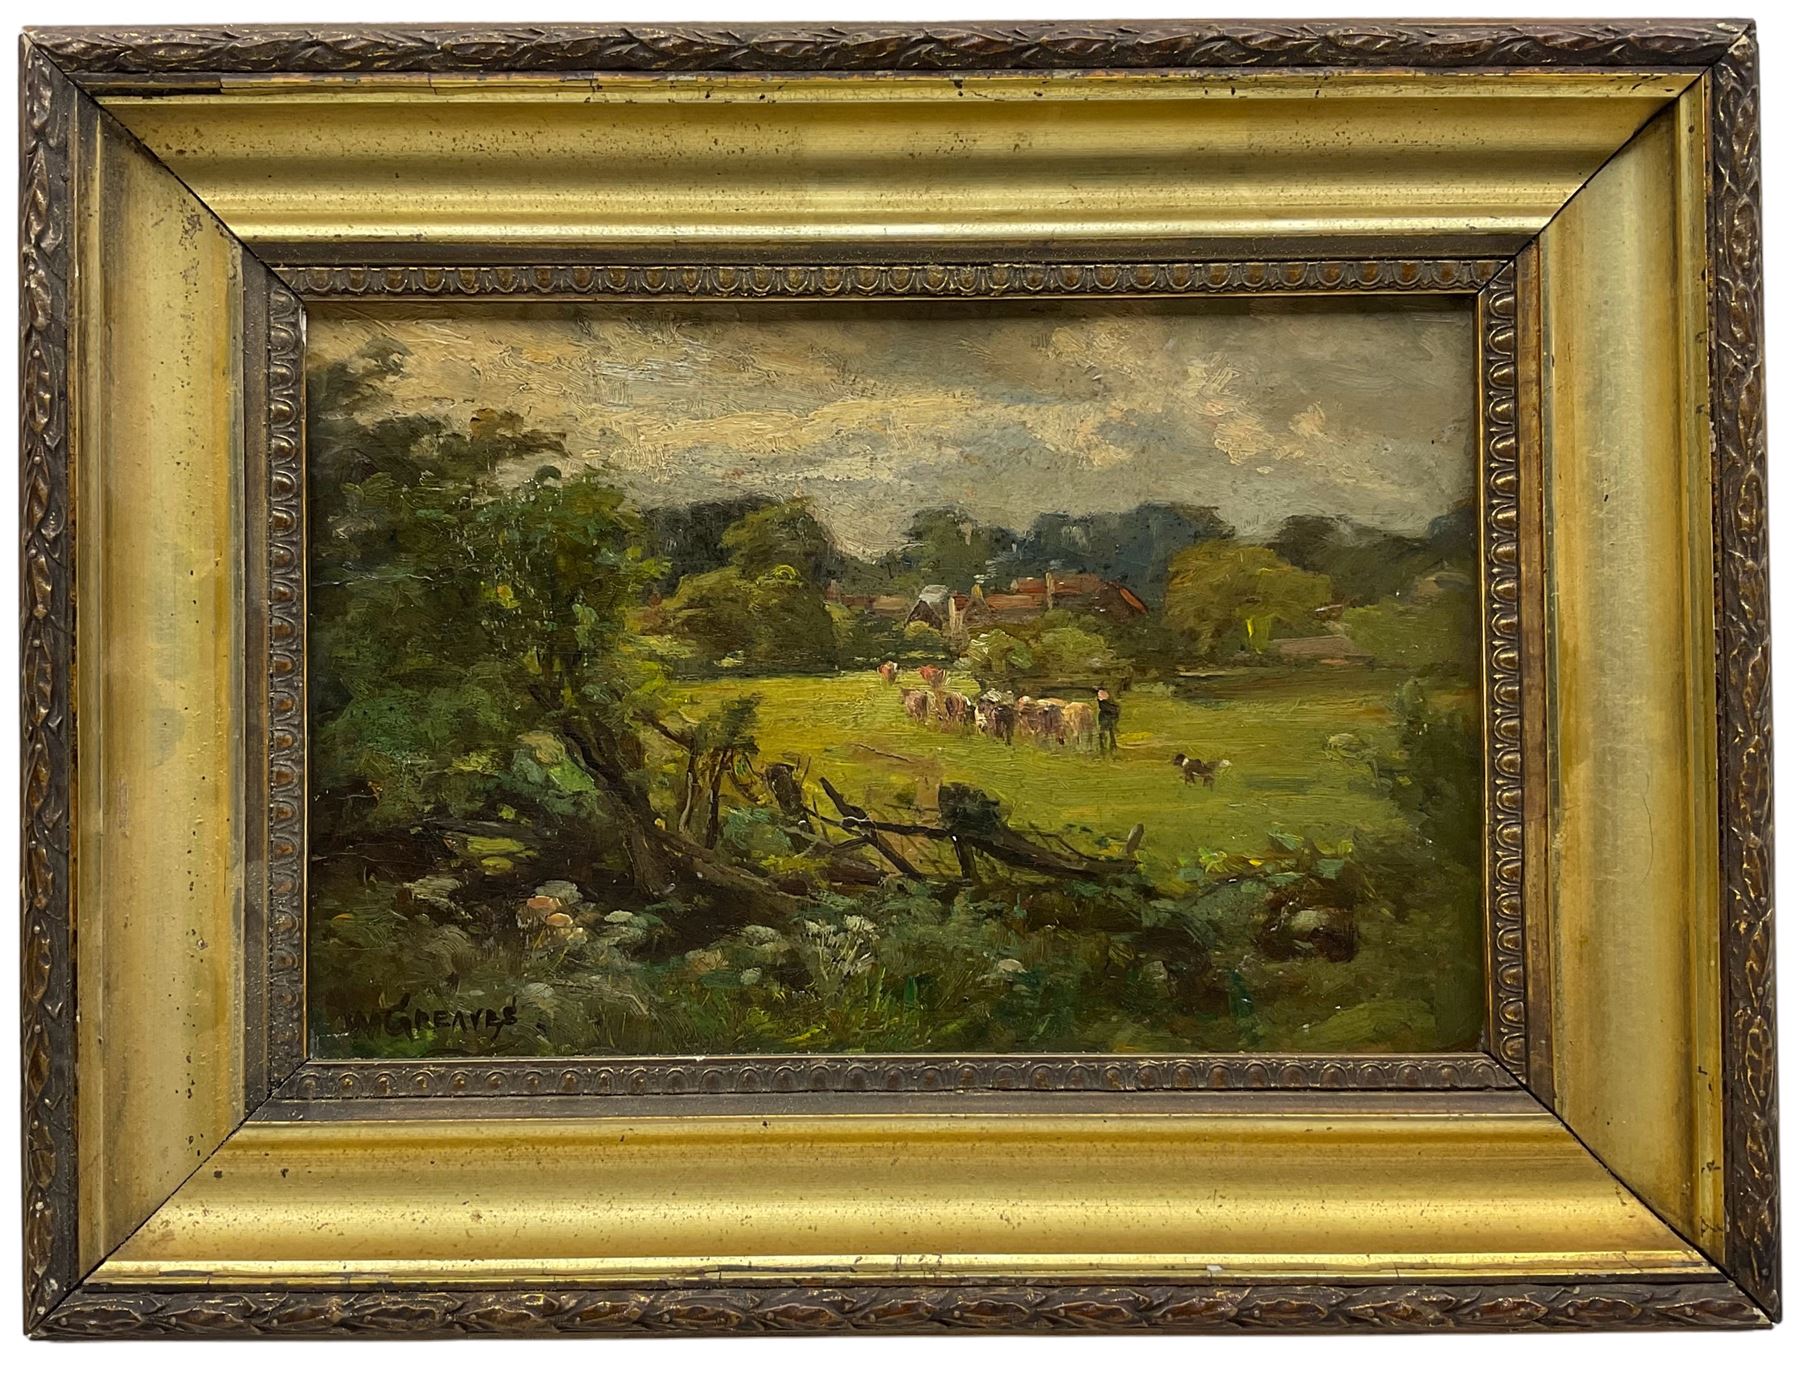 William Greaves (British 1852-1938): Herding Cattle in a Rural Field - Image 2 of 3